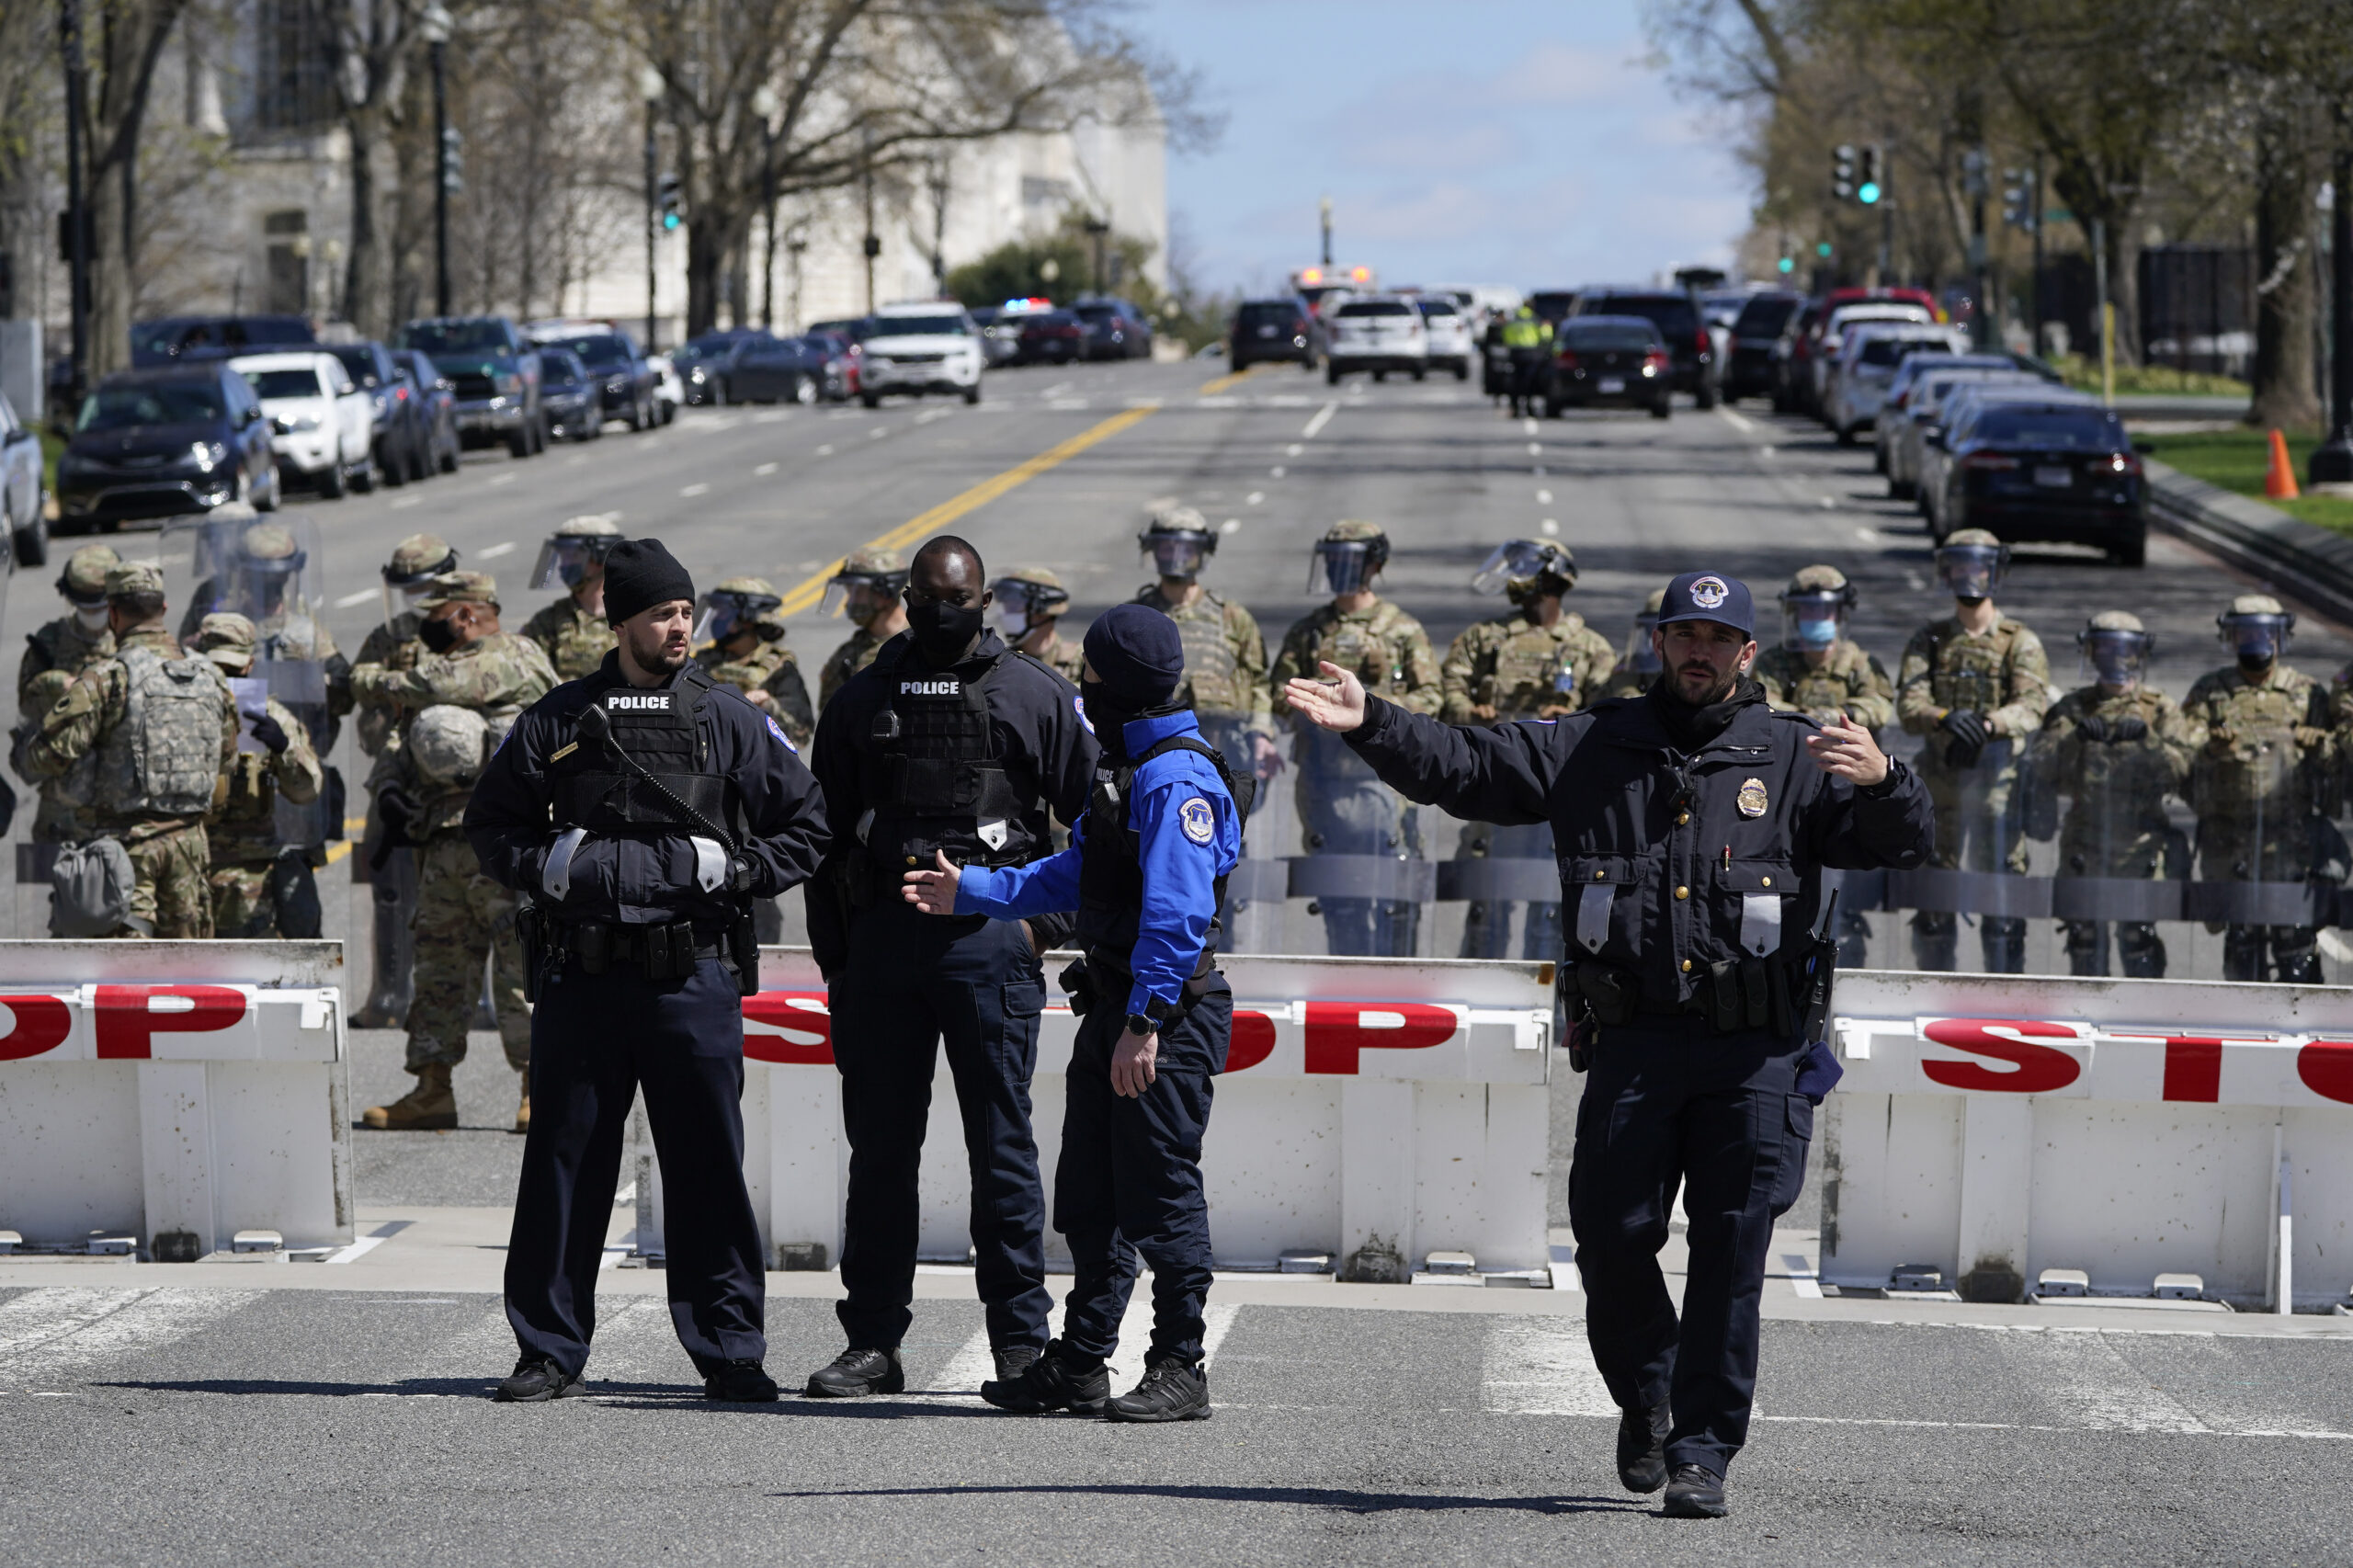 Members of the U.S. Capitol Police stand guard near the scene of a car that crashed into a barrier on Capitol Hill in Washington, Friday, April 2, 2021. Photo: Patrick Semansky / AP